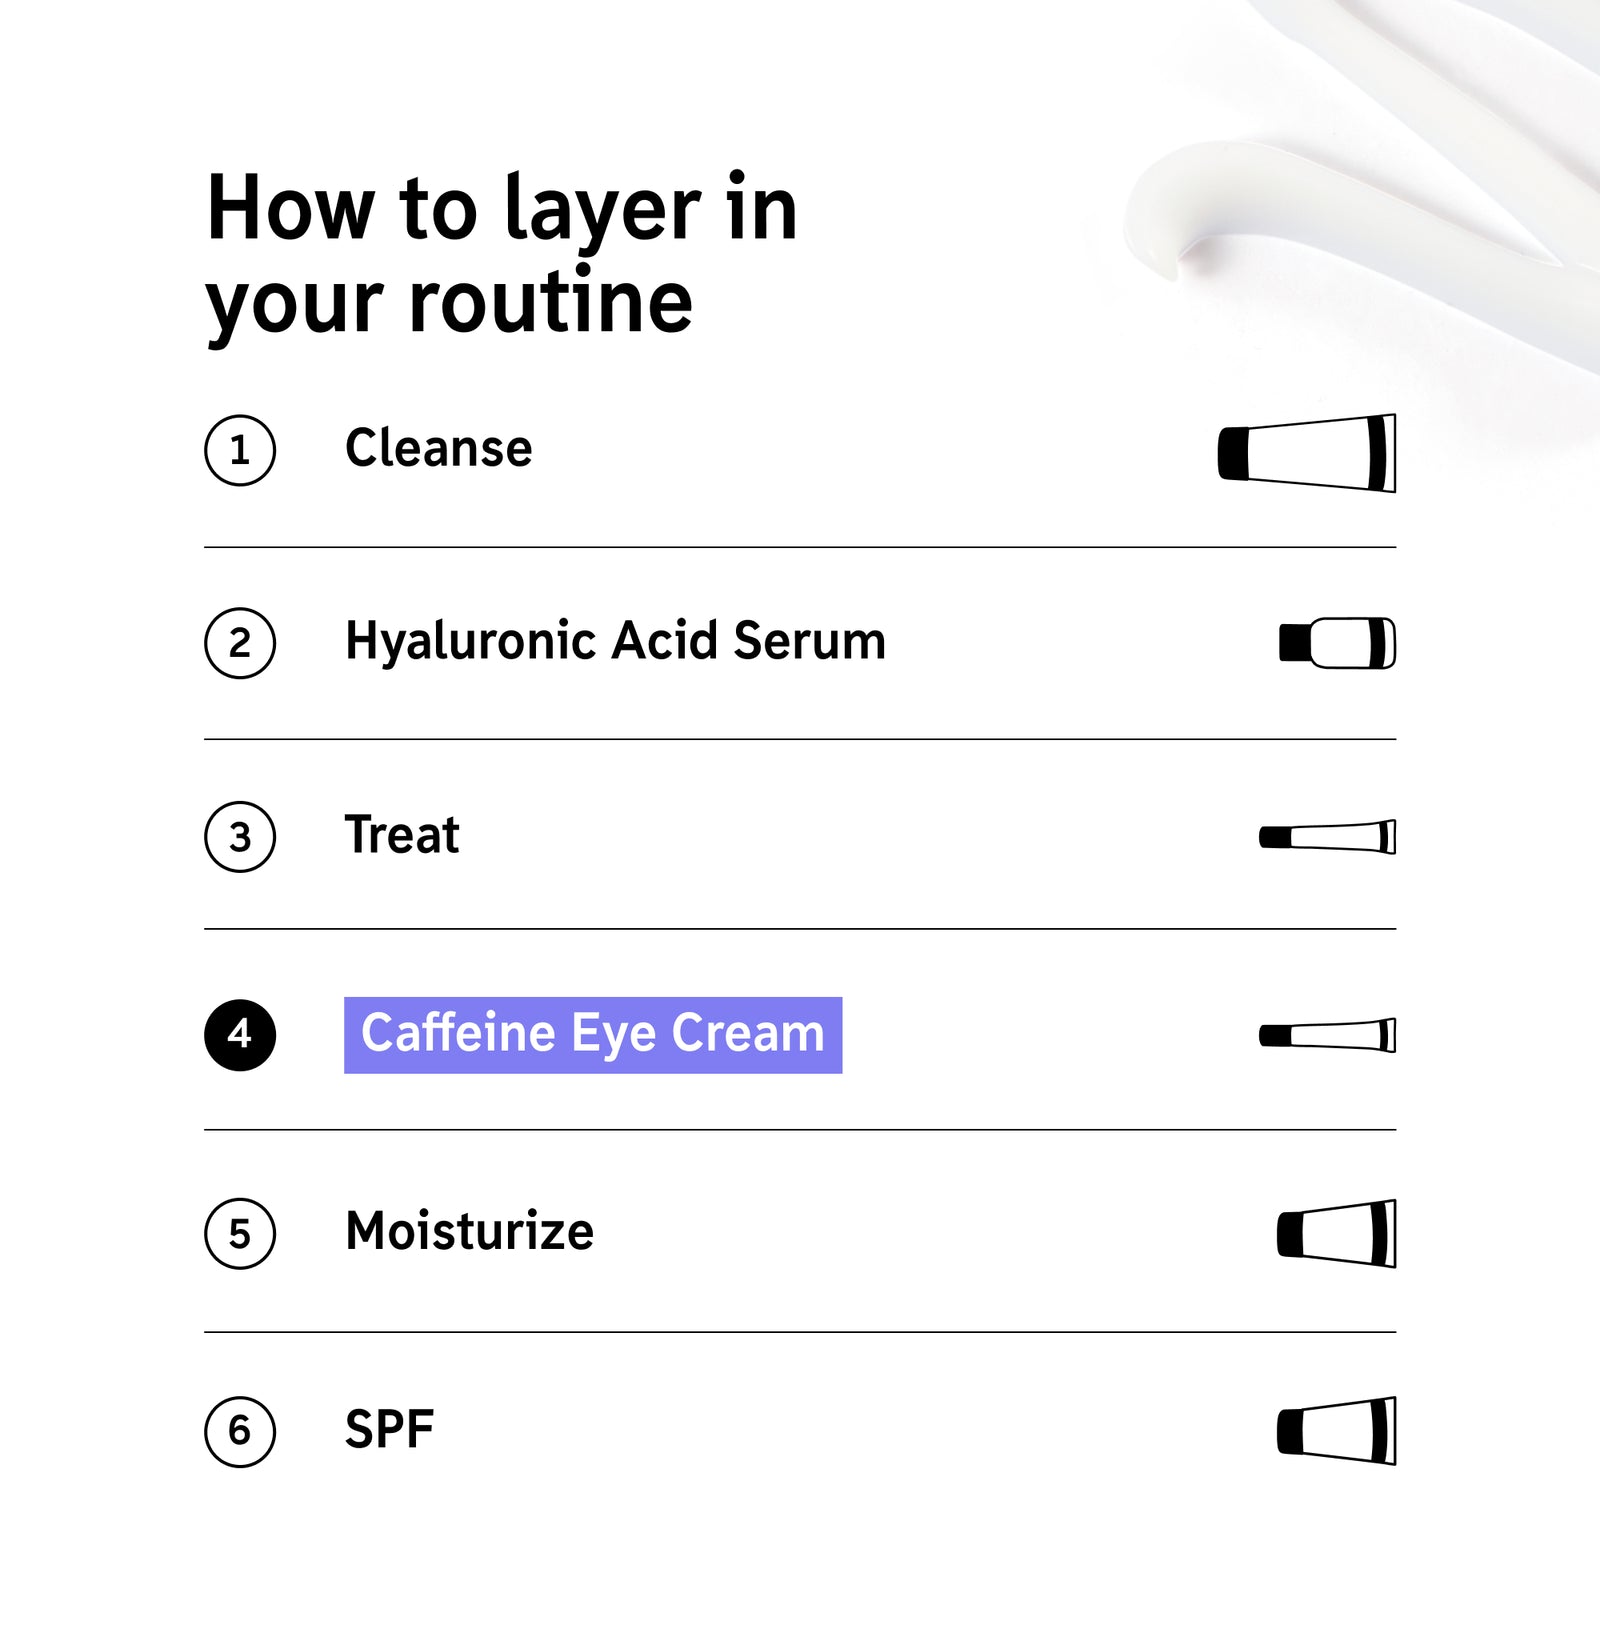 How to layer Caffeiene Eye Cream in your routine